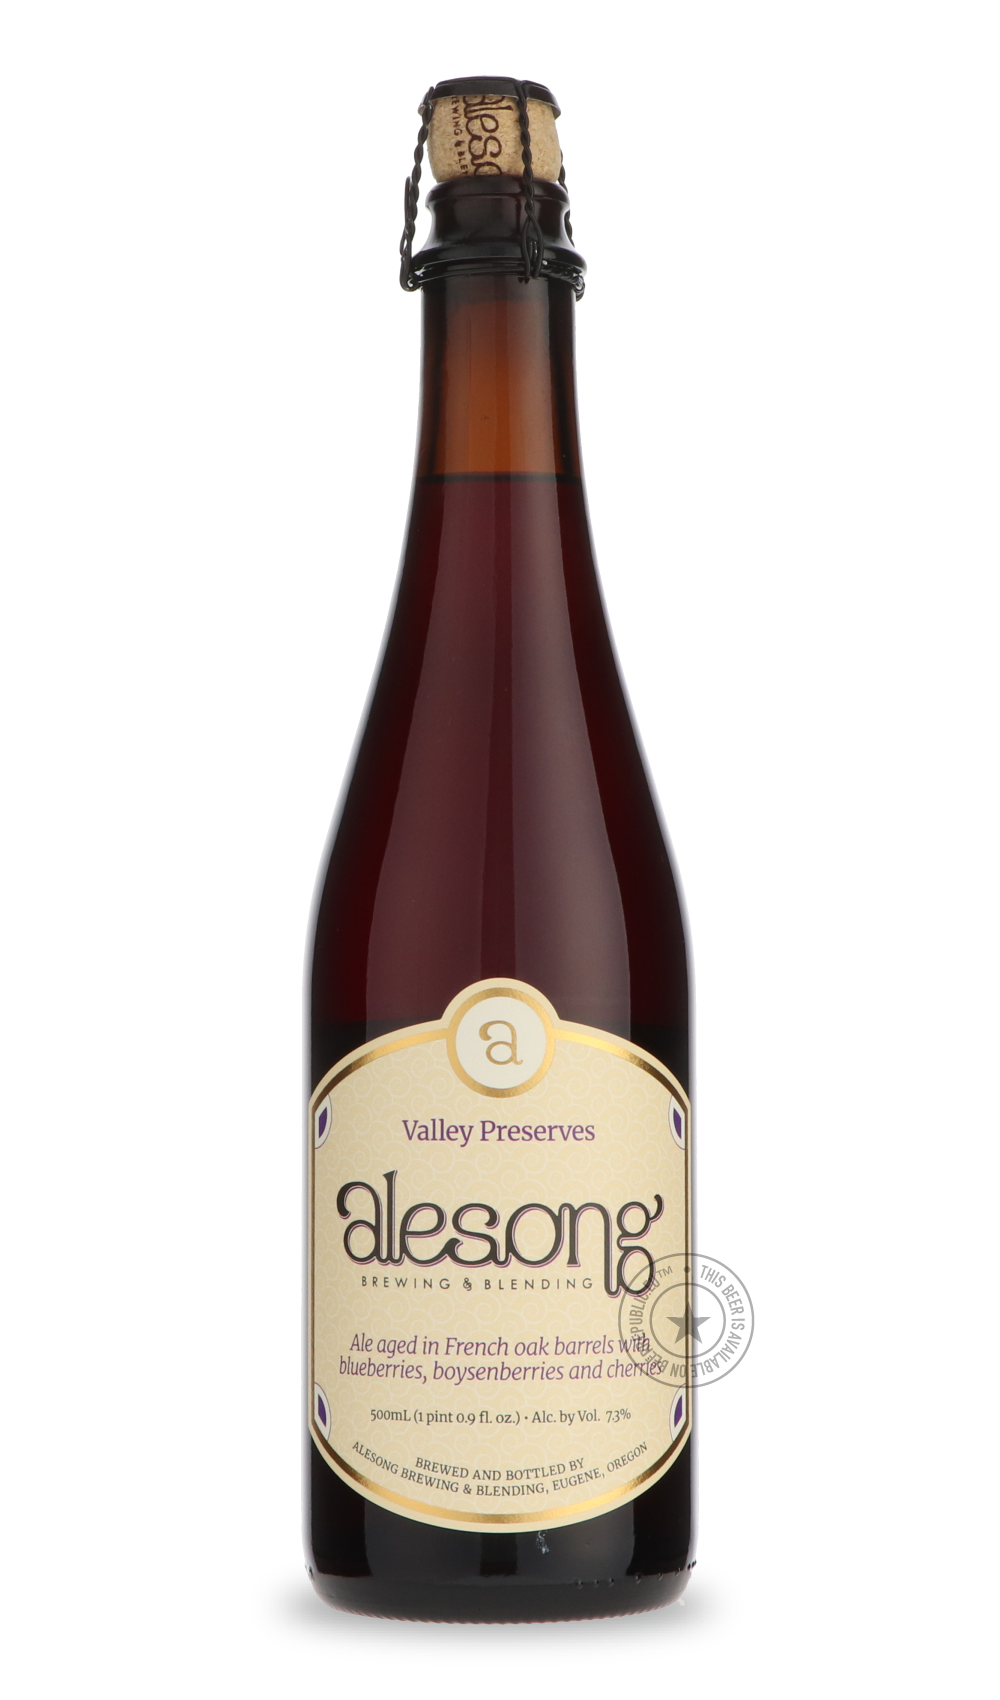 -Alesong- Valley Preserves 2021-Sour / Wild & Fruity- Only @ Beer Republic - The best online beer store for American & Canadian craft beer - Buy beer online from the USA and Canada - Bier online kopen - Amerikaans bier kopen - Craft beer store - Craft beer kopen - Amerikanisch bier kaufen - Bier online kaufen - Acheter biere online - IPA - Stout - Porter - New England IPA - Hazy IPA - Imperial Stout - Barrel Aged - Barrel Aged Imperial Stout - Brown - Dark beer - Blond - Blonde - Pilsner - Lager - Wheat - W